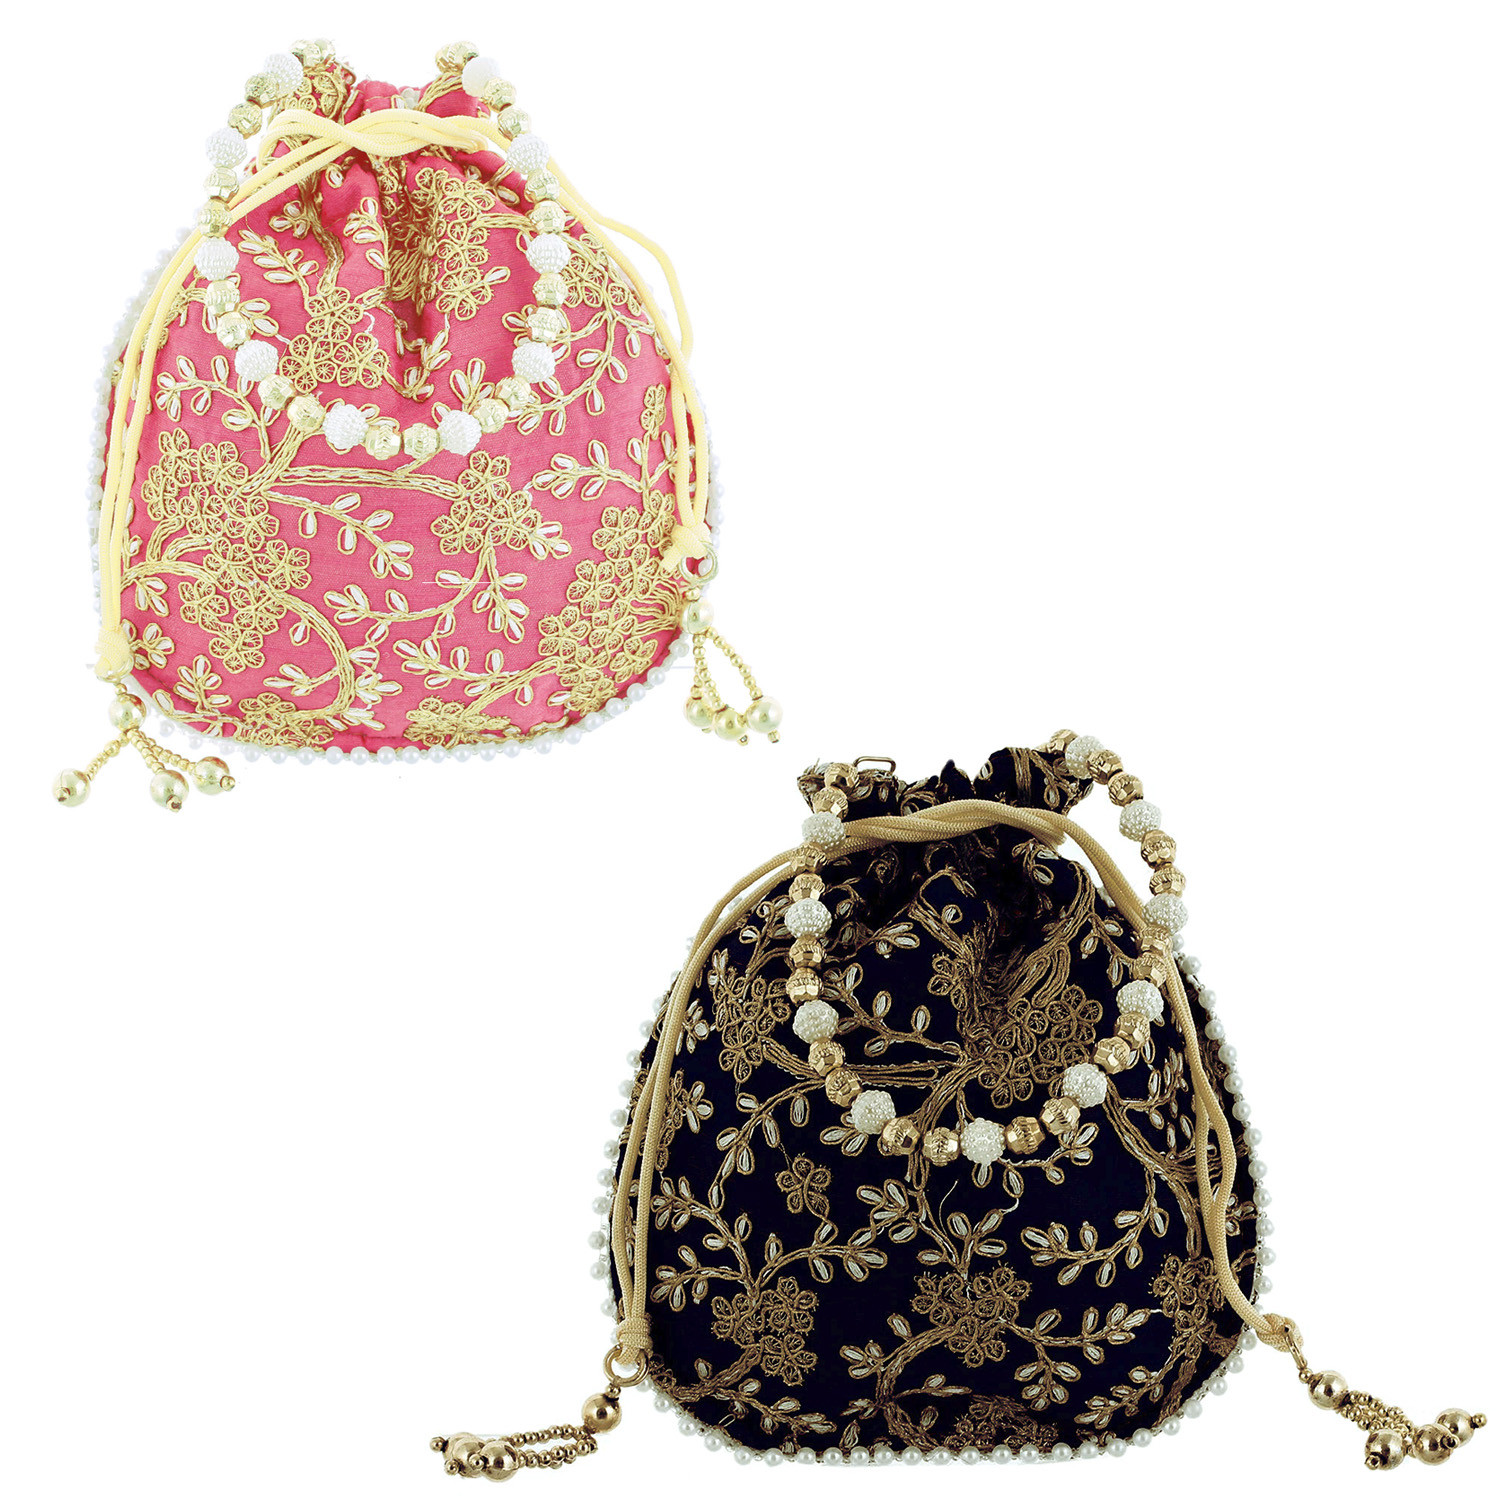 Kuber Industries Embroidery Drawstring Potli|Hand Purse With Gold Pearl Border & Handle For Woman,Girls Pack of 2 (Light Pink & Black)